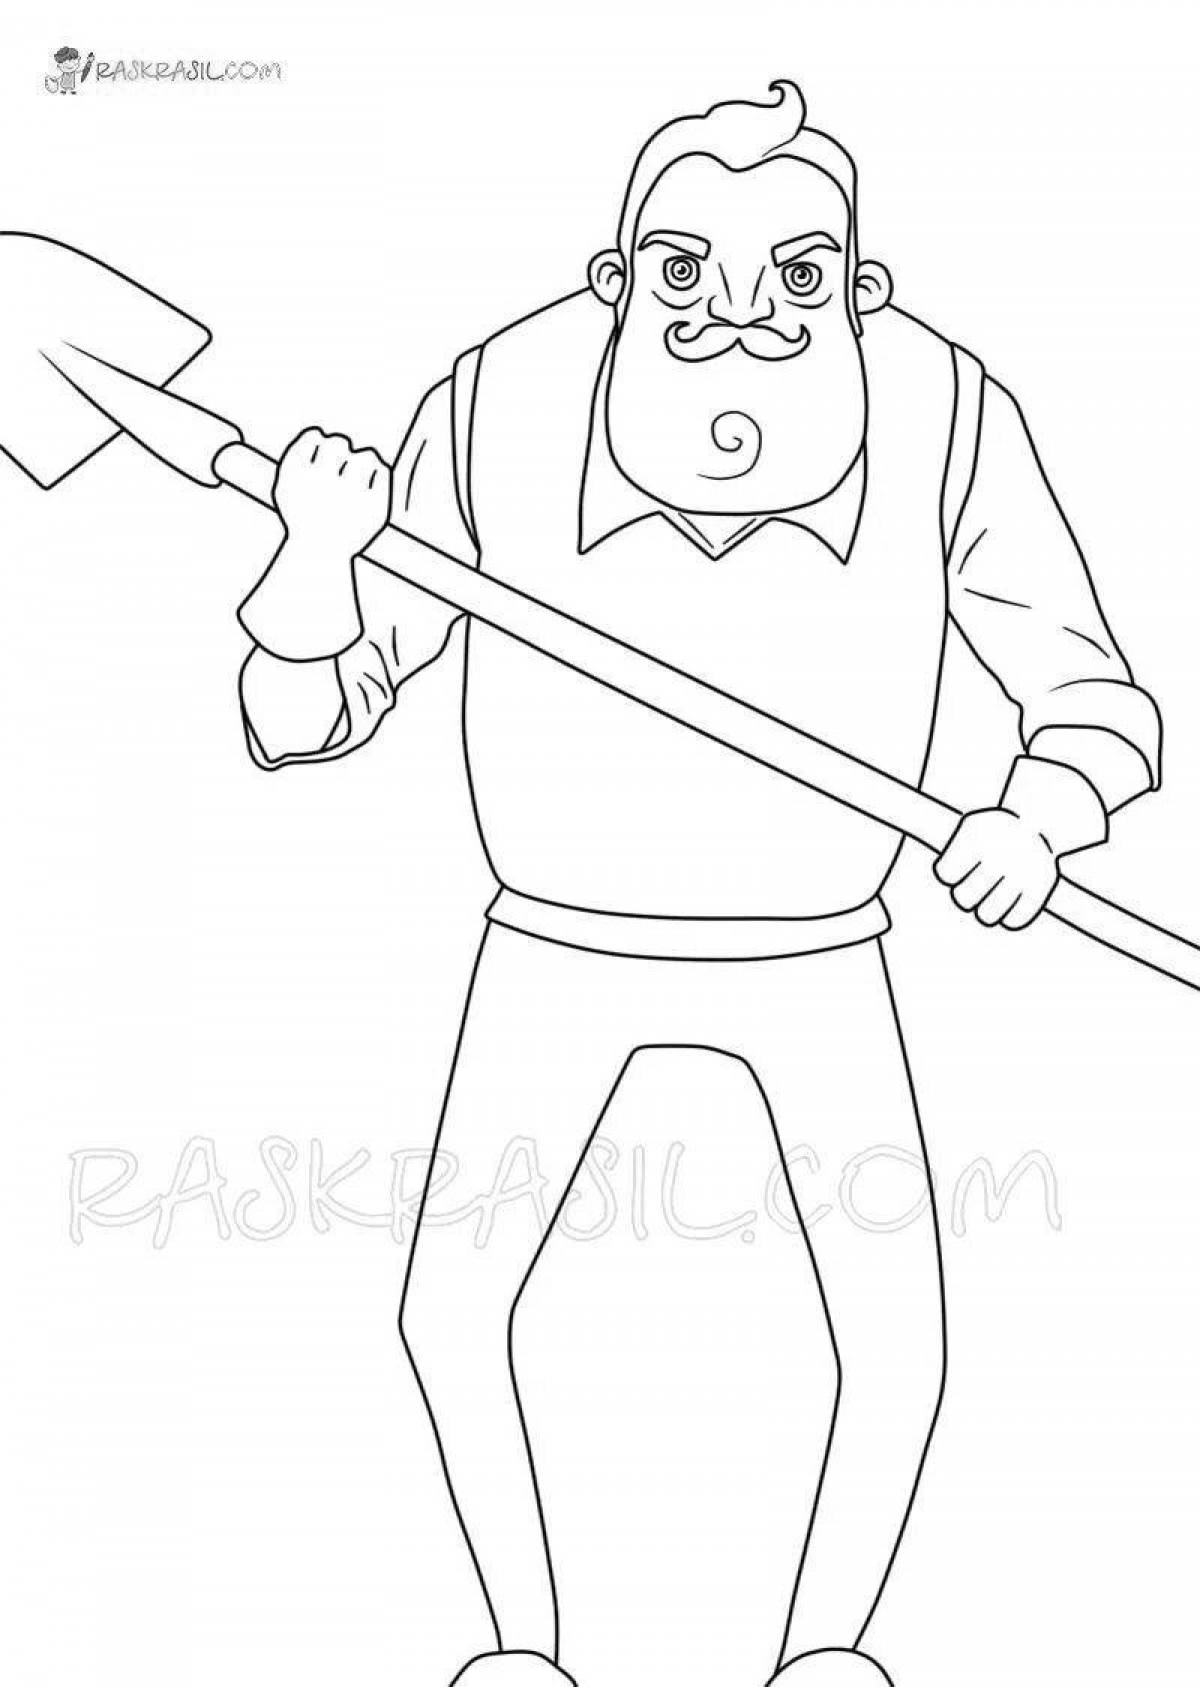 Fabulous hello neighbor house coloring page